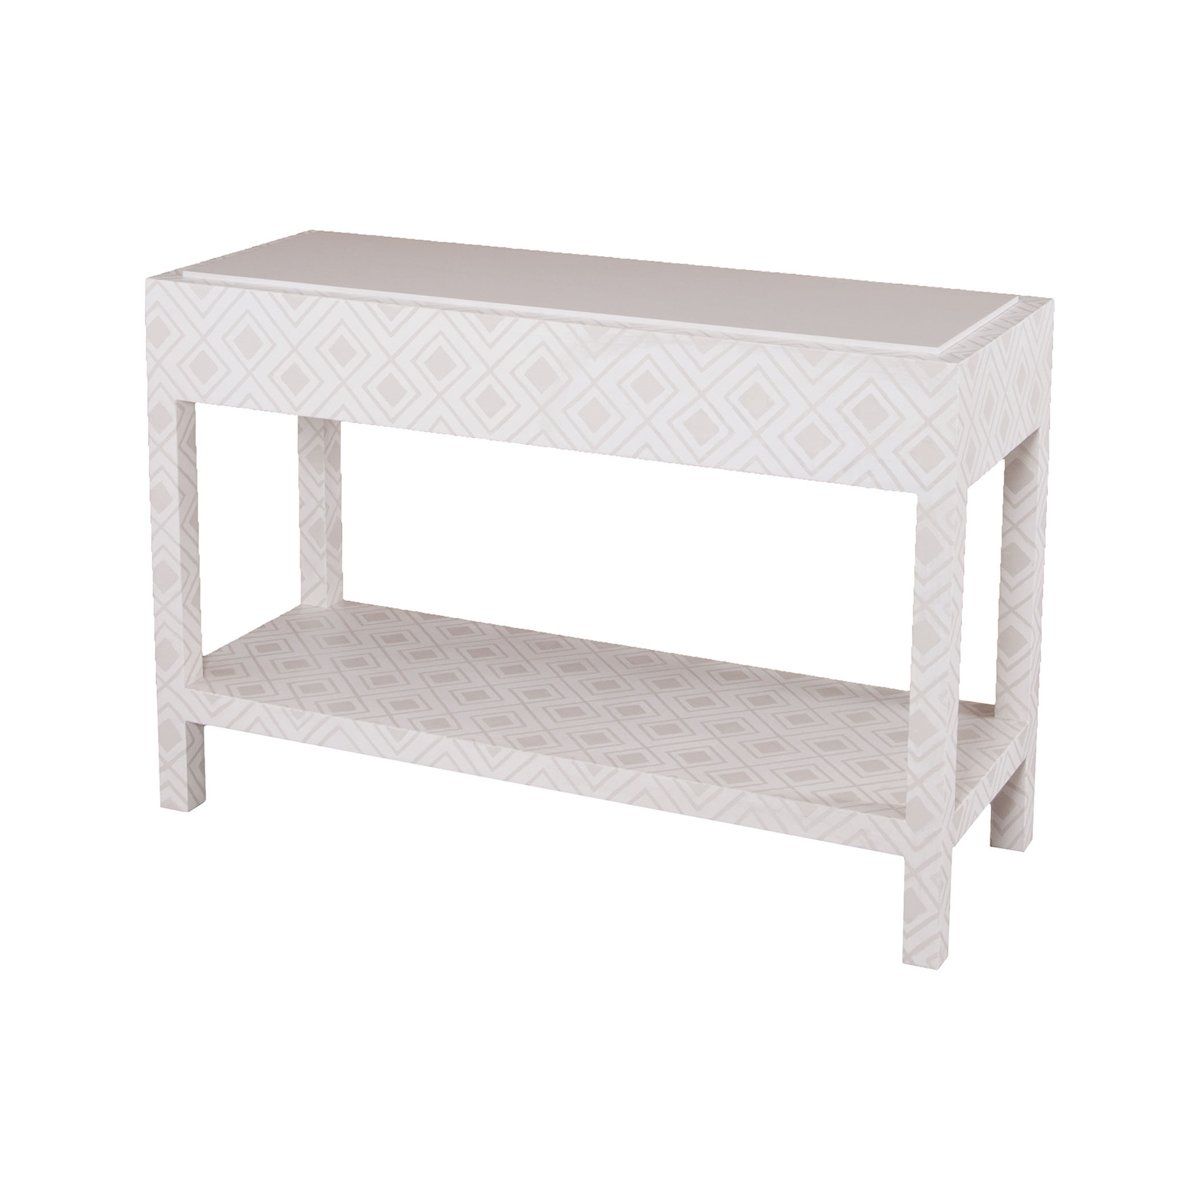 Kent Fabric Wrapped Console | Products In 2018 | Pinterest With Regard To Parsons Travertine Top & Stainless Steel Base 48x16 Console Tables (View 8 of 30)